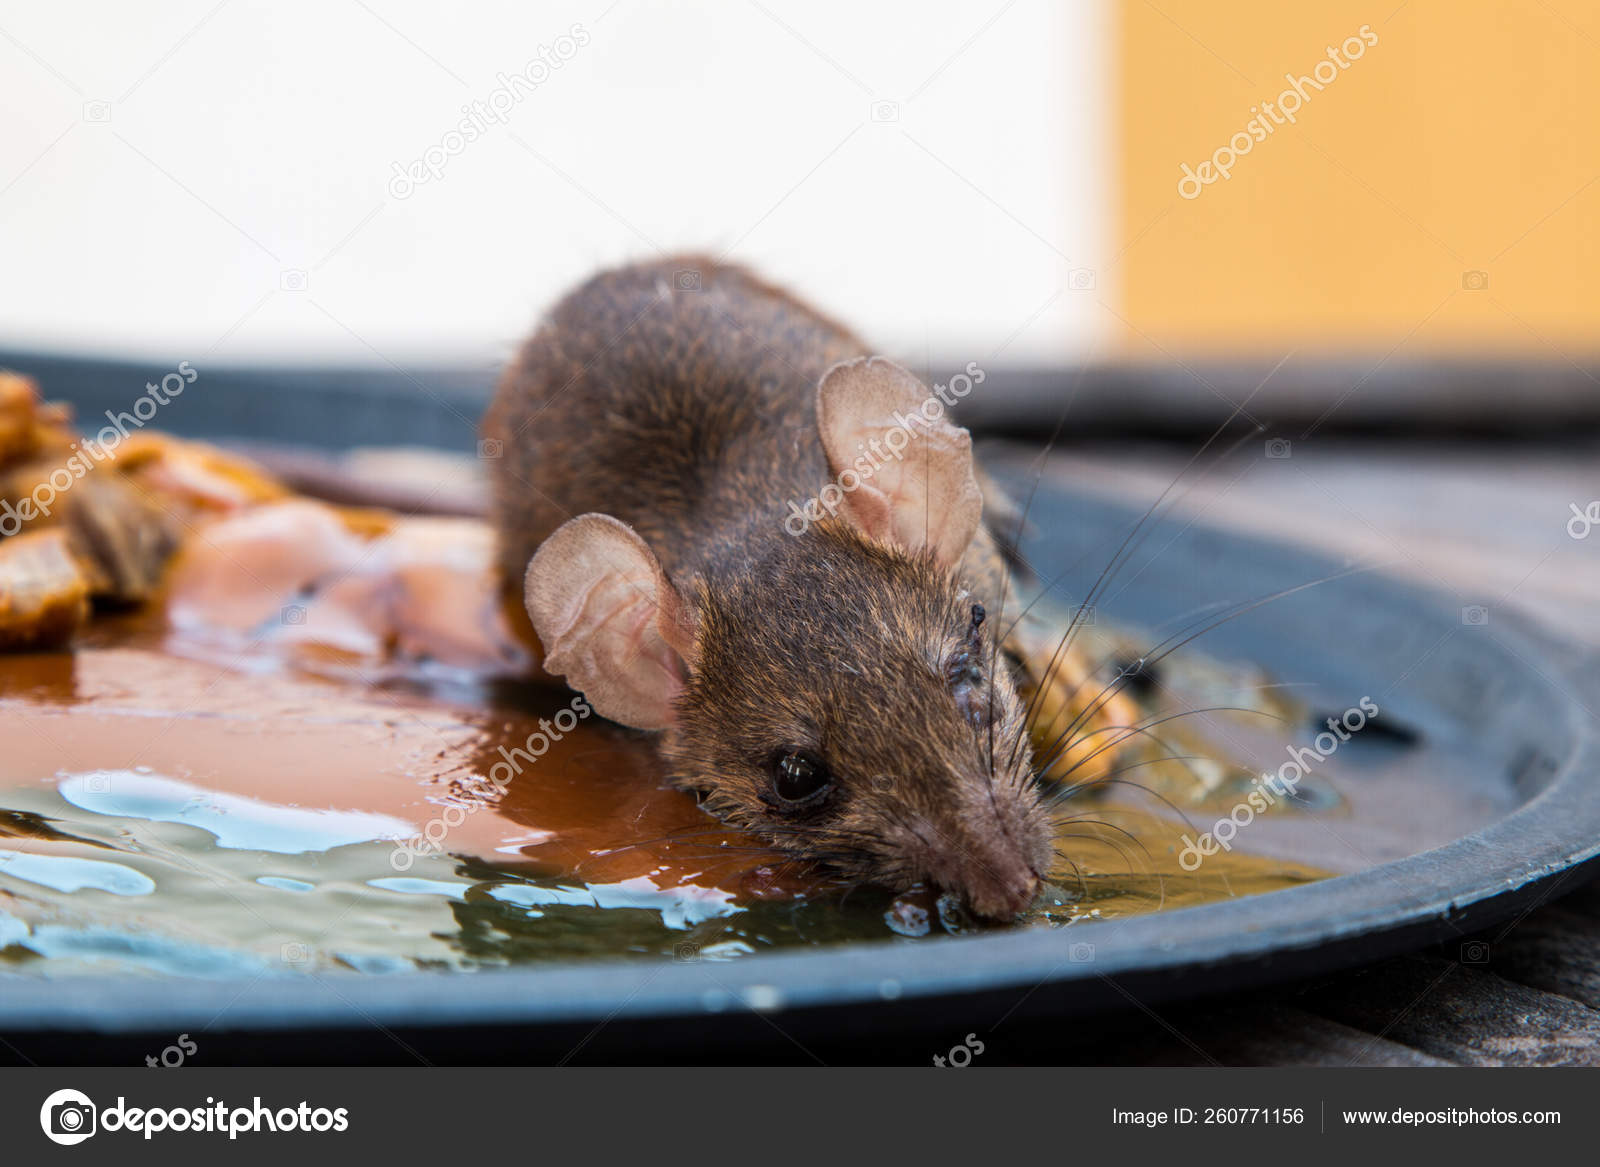 High Angle View Of Dead Mouse On Glue Mouse Trap High-Res Stock Photo -  Getty Images